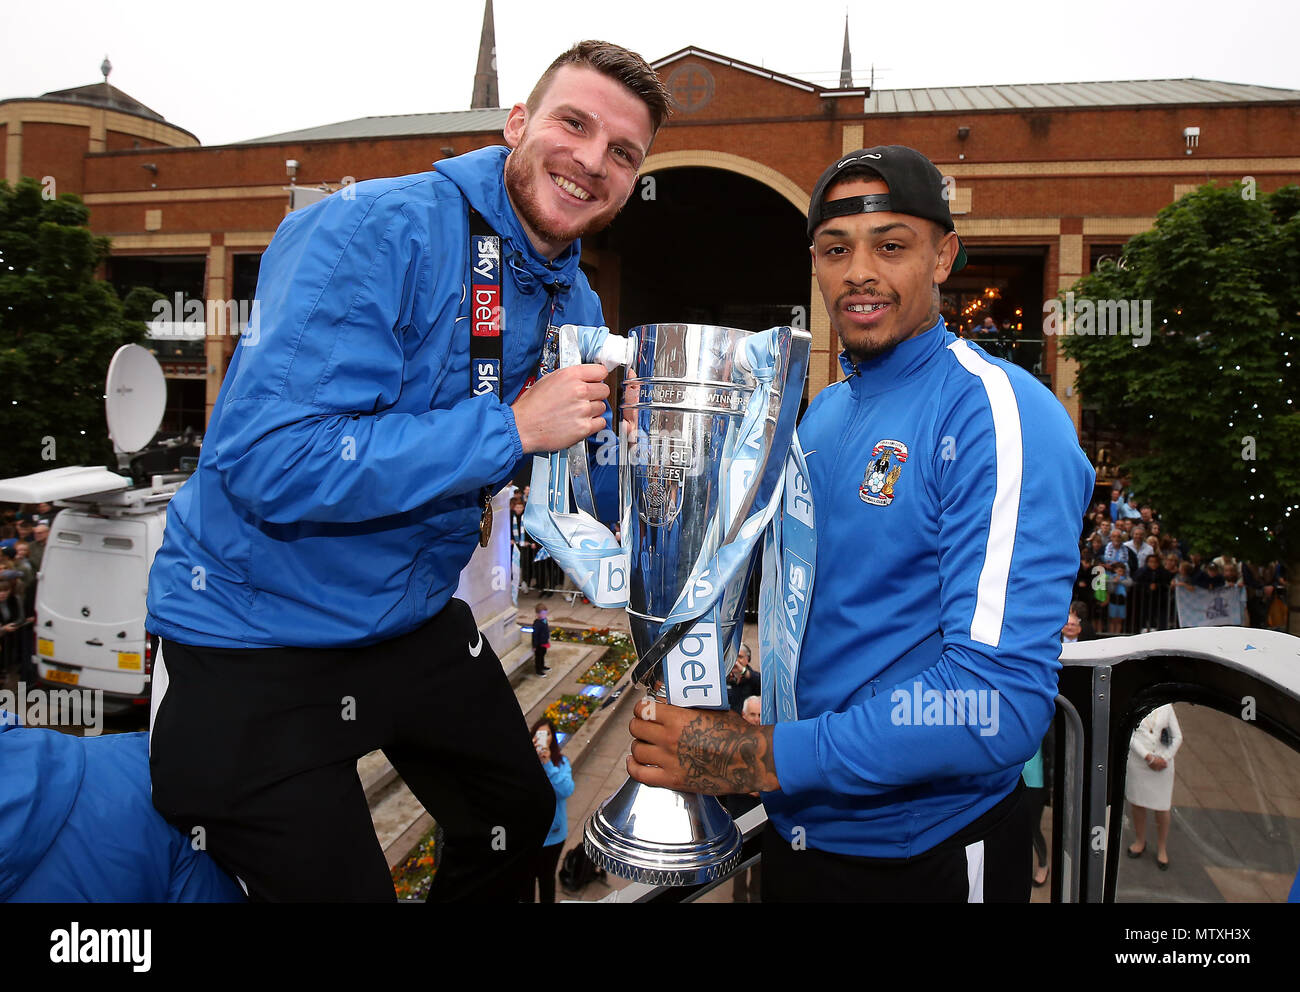 Coventry City's Chris Stokes (left) and Jonson Clarke-Harris with the trophy during the Sky Bet League Two promotion parade in Coventry. PRESS ASSOCIATION Photo. Picture date Wednesday May 30, 2018. See PA story SOCCER Coventry. Photo credit should read: Nigel French/PA Wire Stock Photo